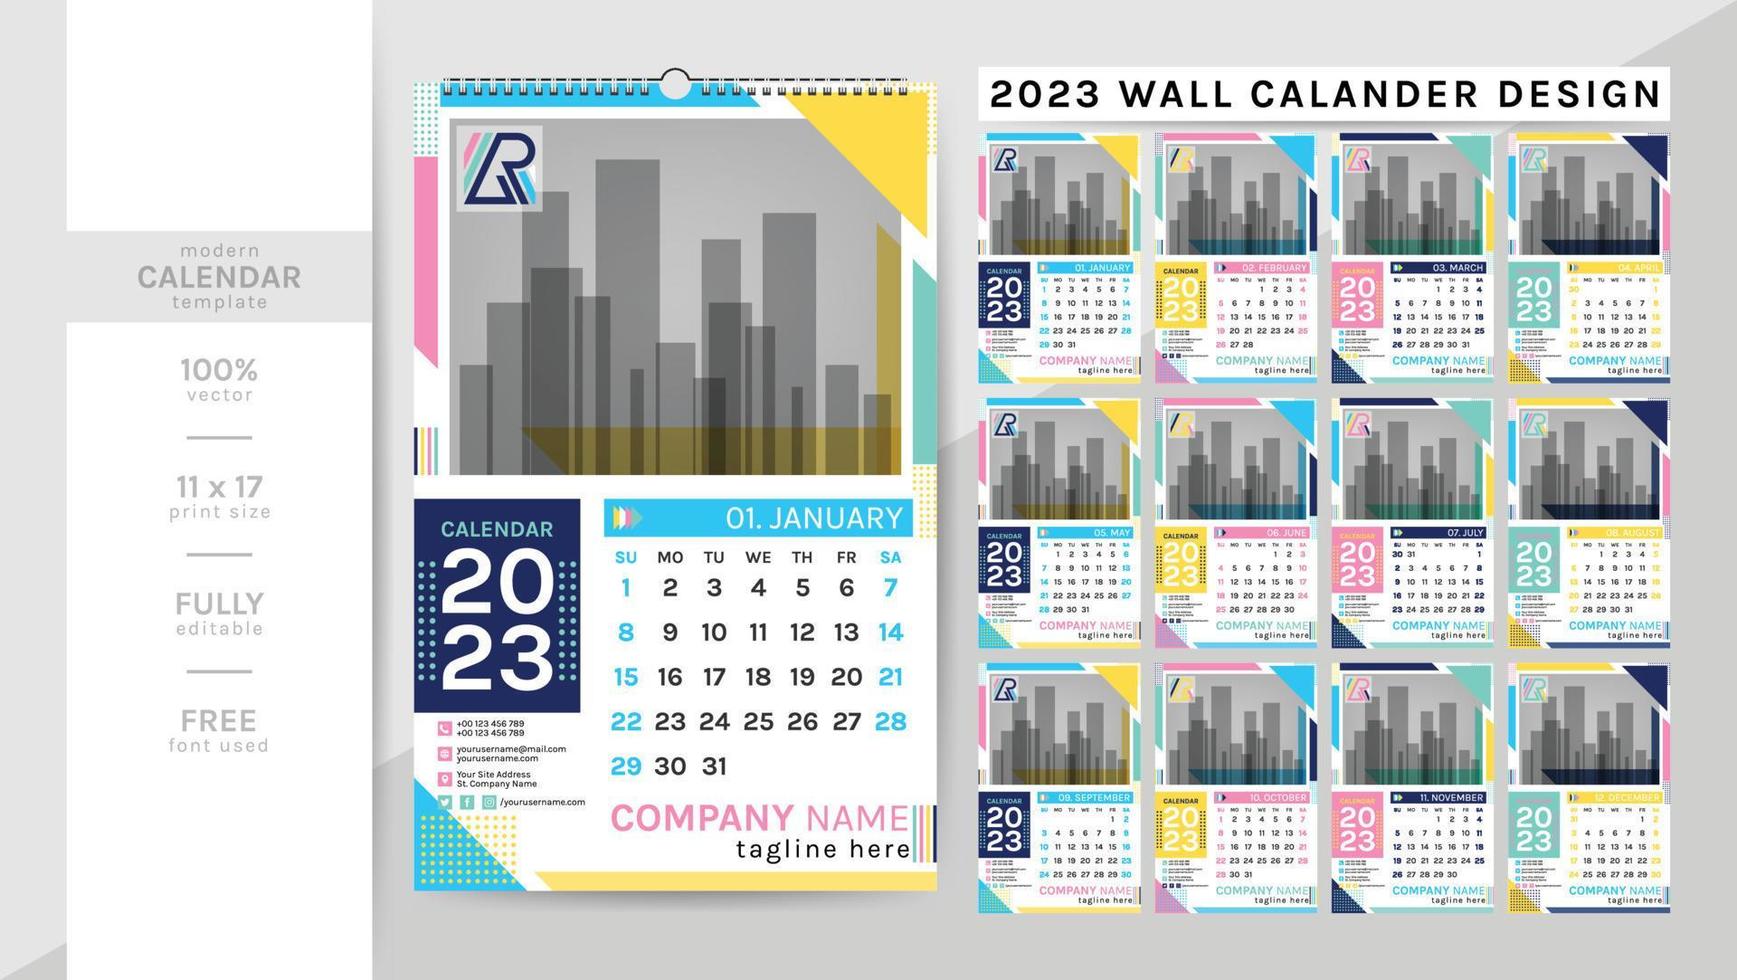 creative Elegant wall Calendar template for the 2023 year. Planner diary in a minimalist and unique shape 2 theme colorwork style, black and others. Week Starts Sunday and Set of 12 months 12 pages. vector